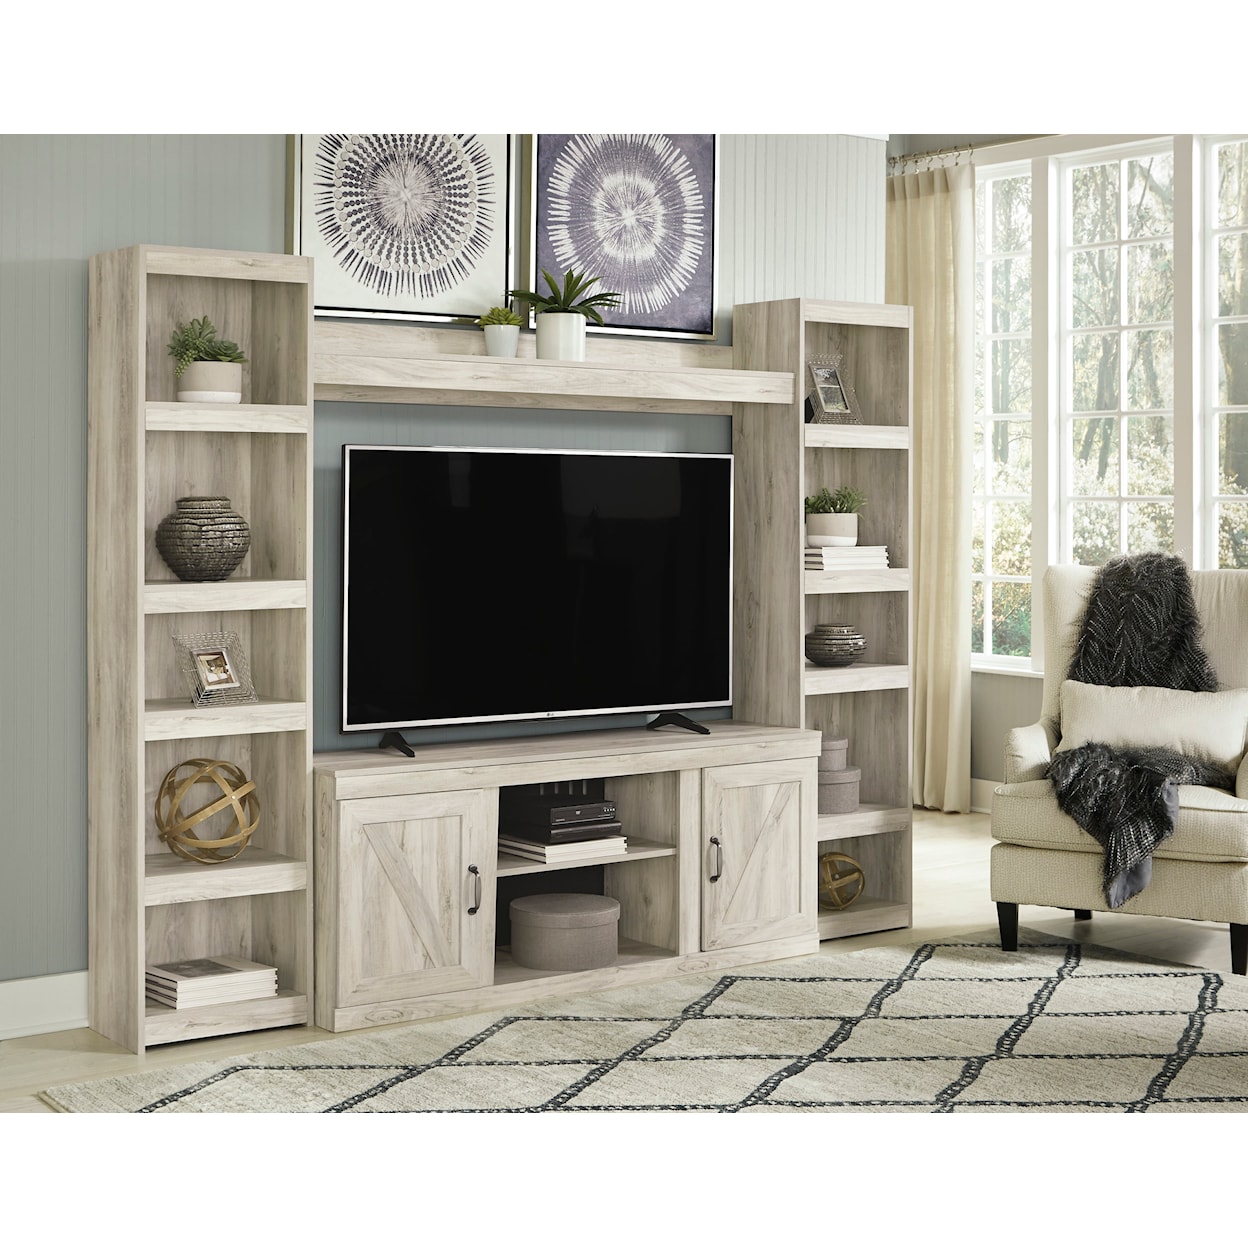 Signature Design by Ashley Bellaby 4-Piece Entertainment Center